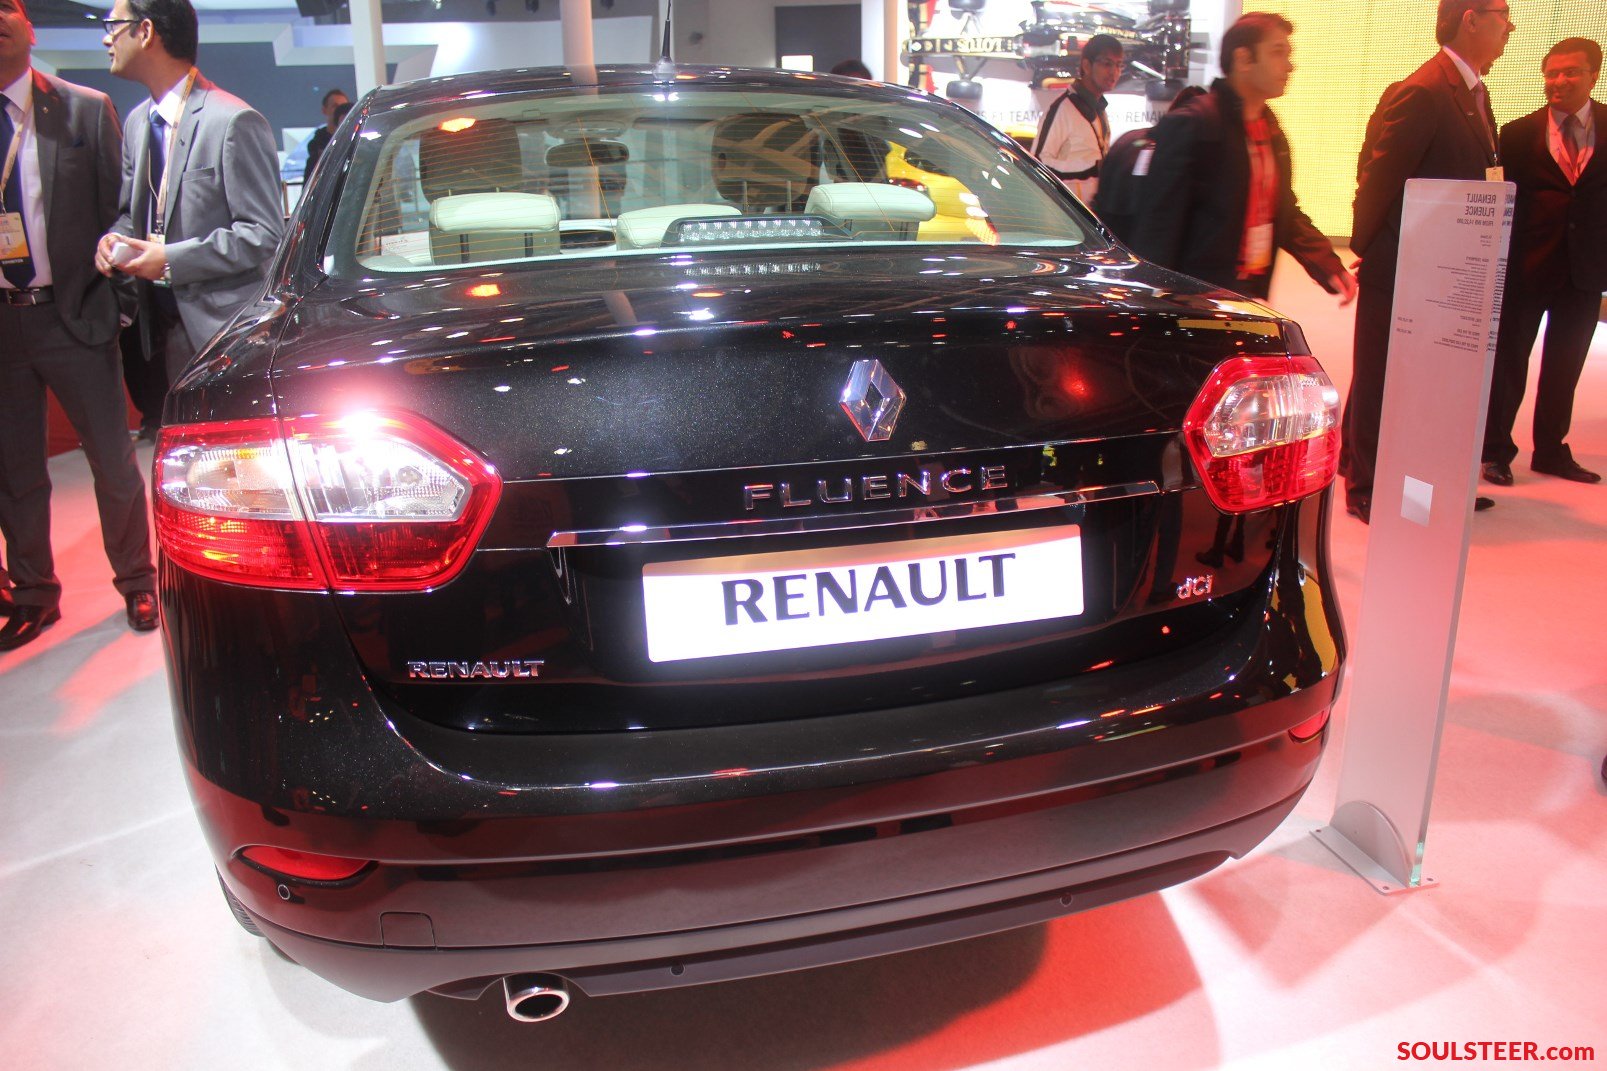 Auto Expo Renault Fluence E4 Diesel Shown In Pearl Black Paint